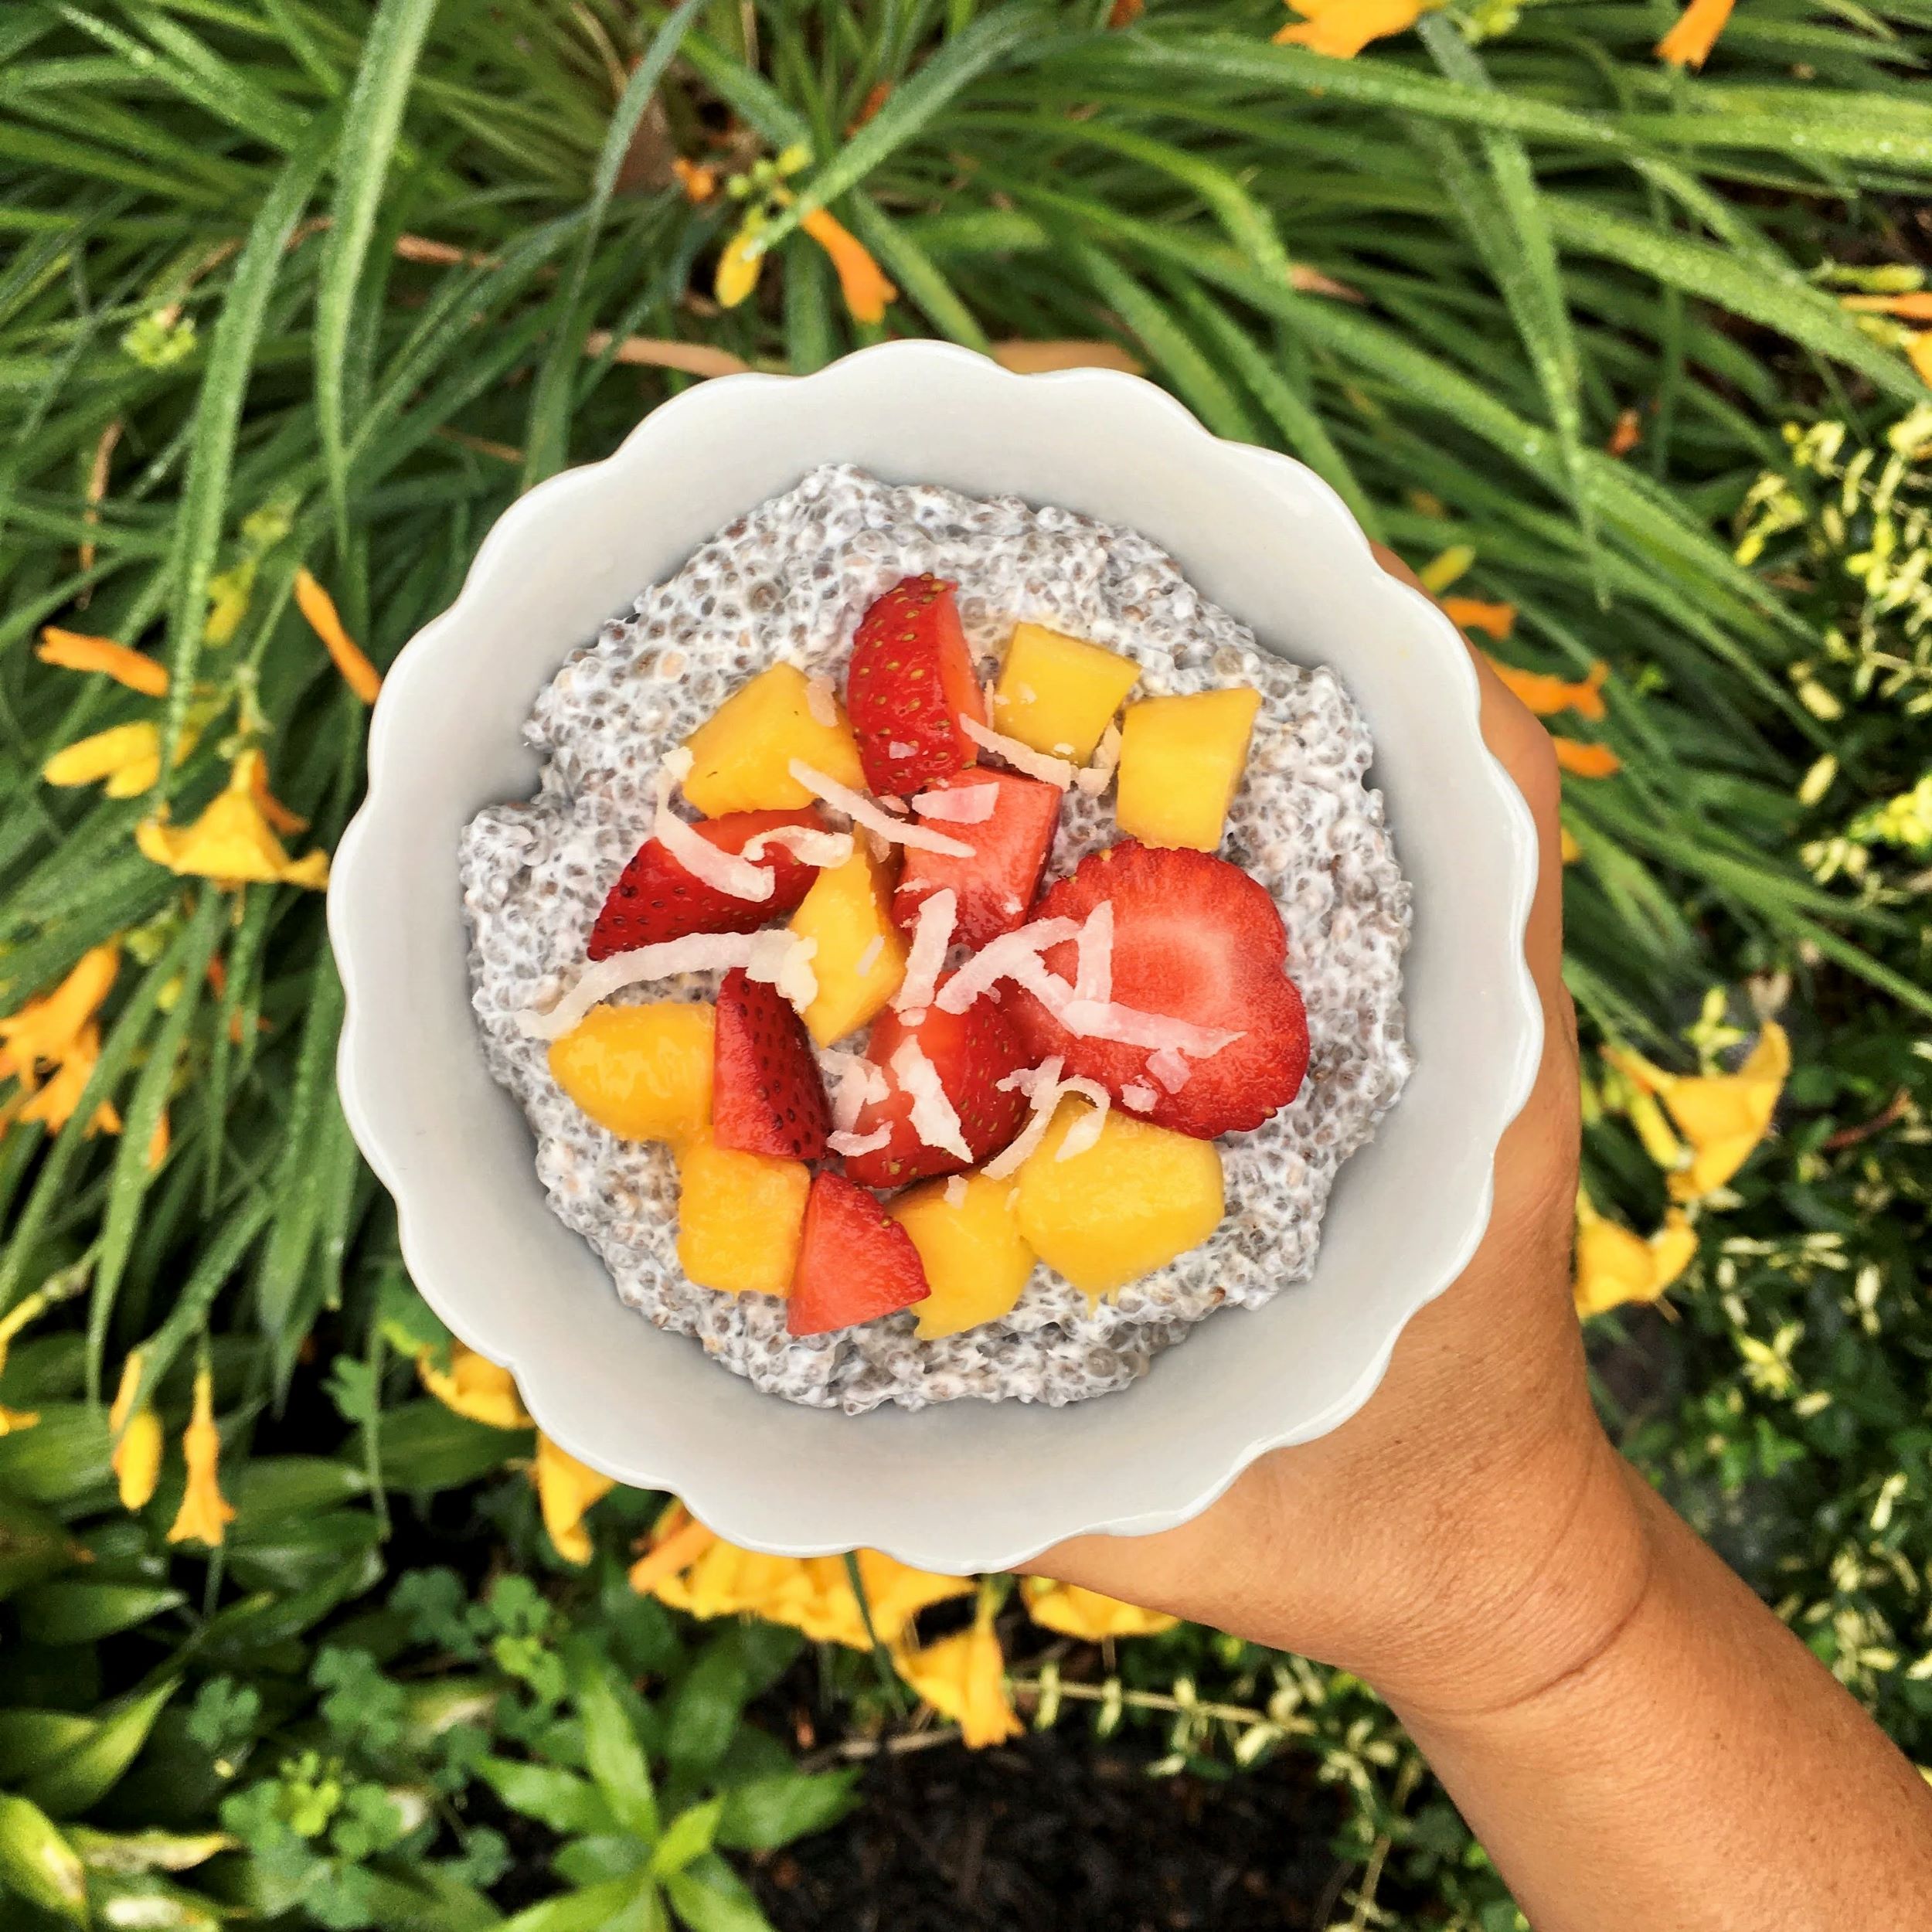 Coconut chia pudding topped with mango, strawberry and coconut flakes